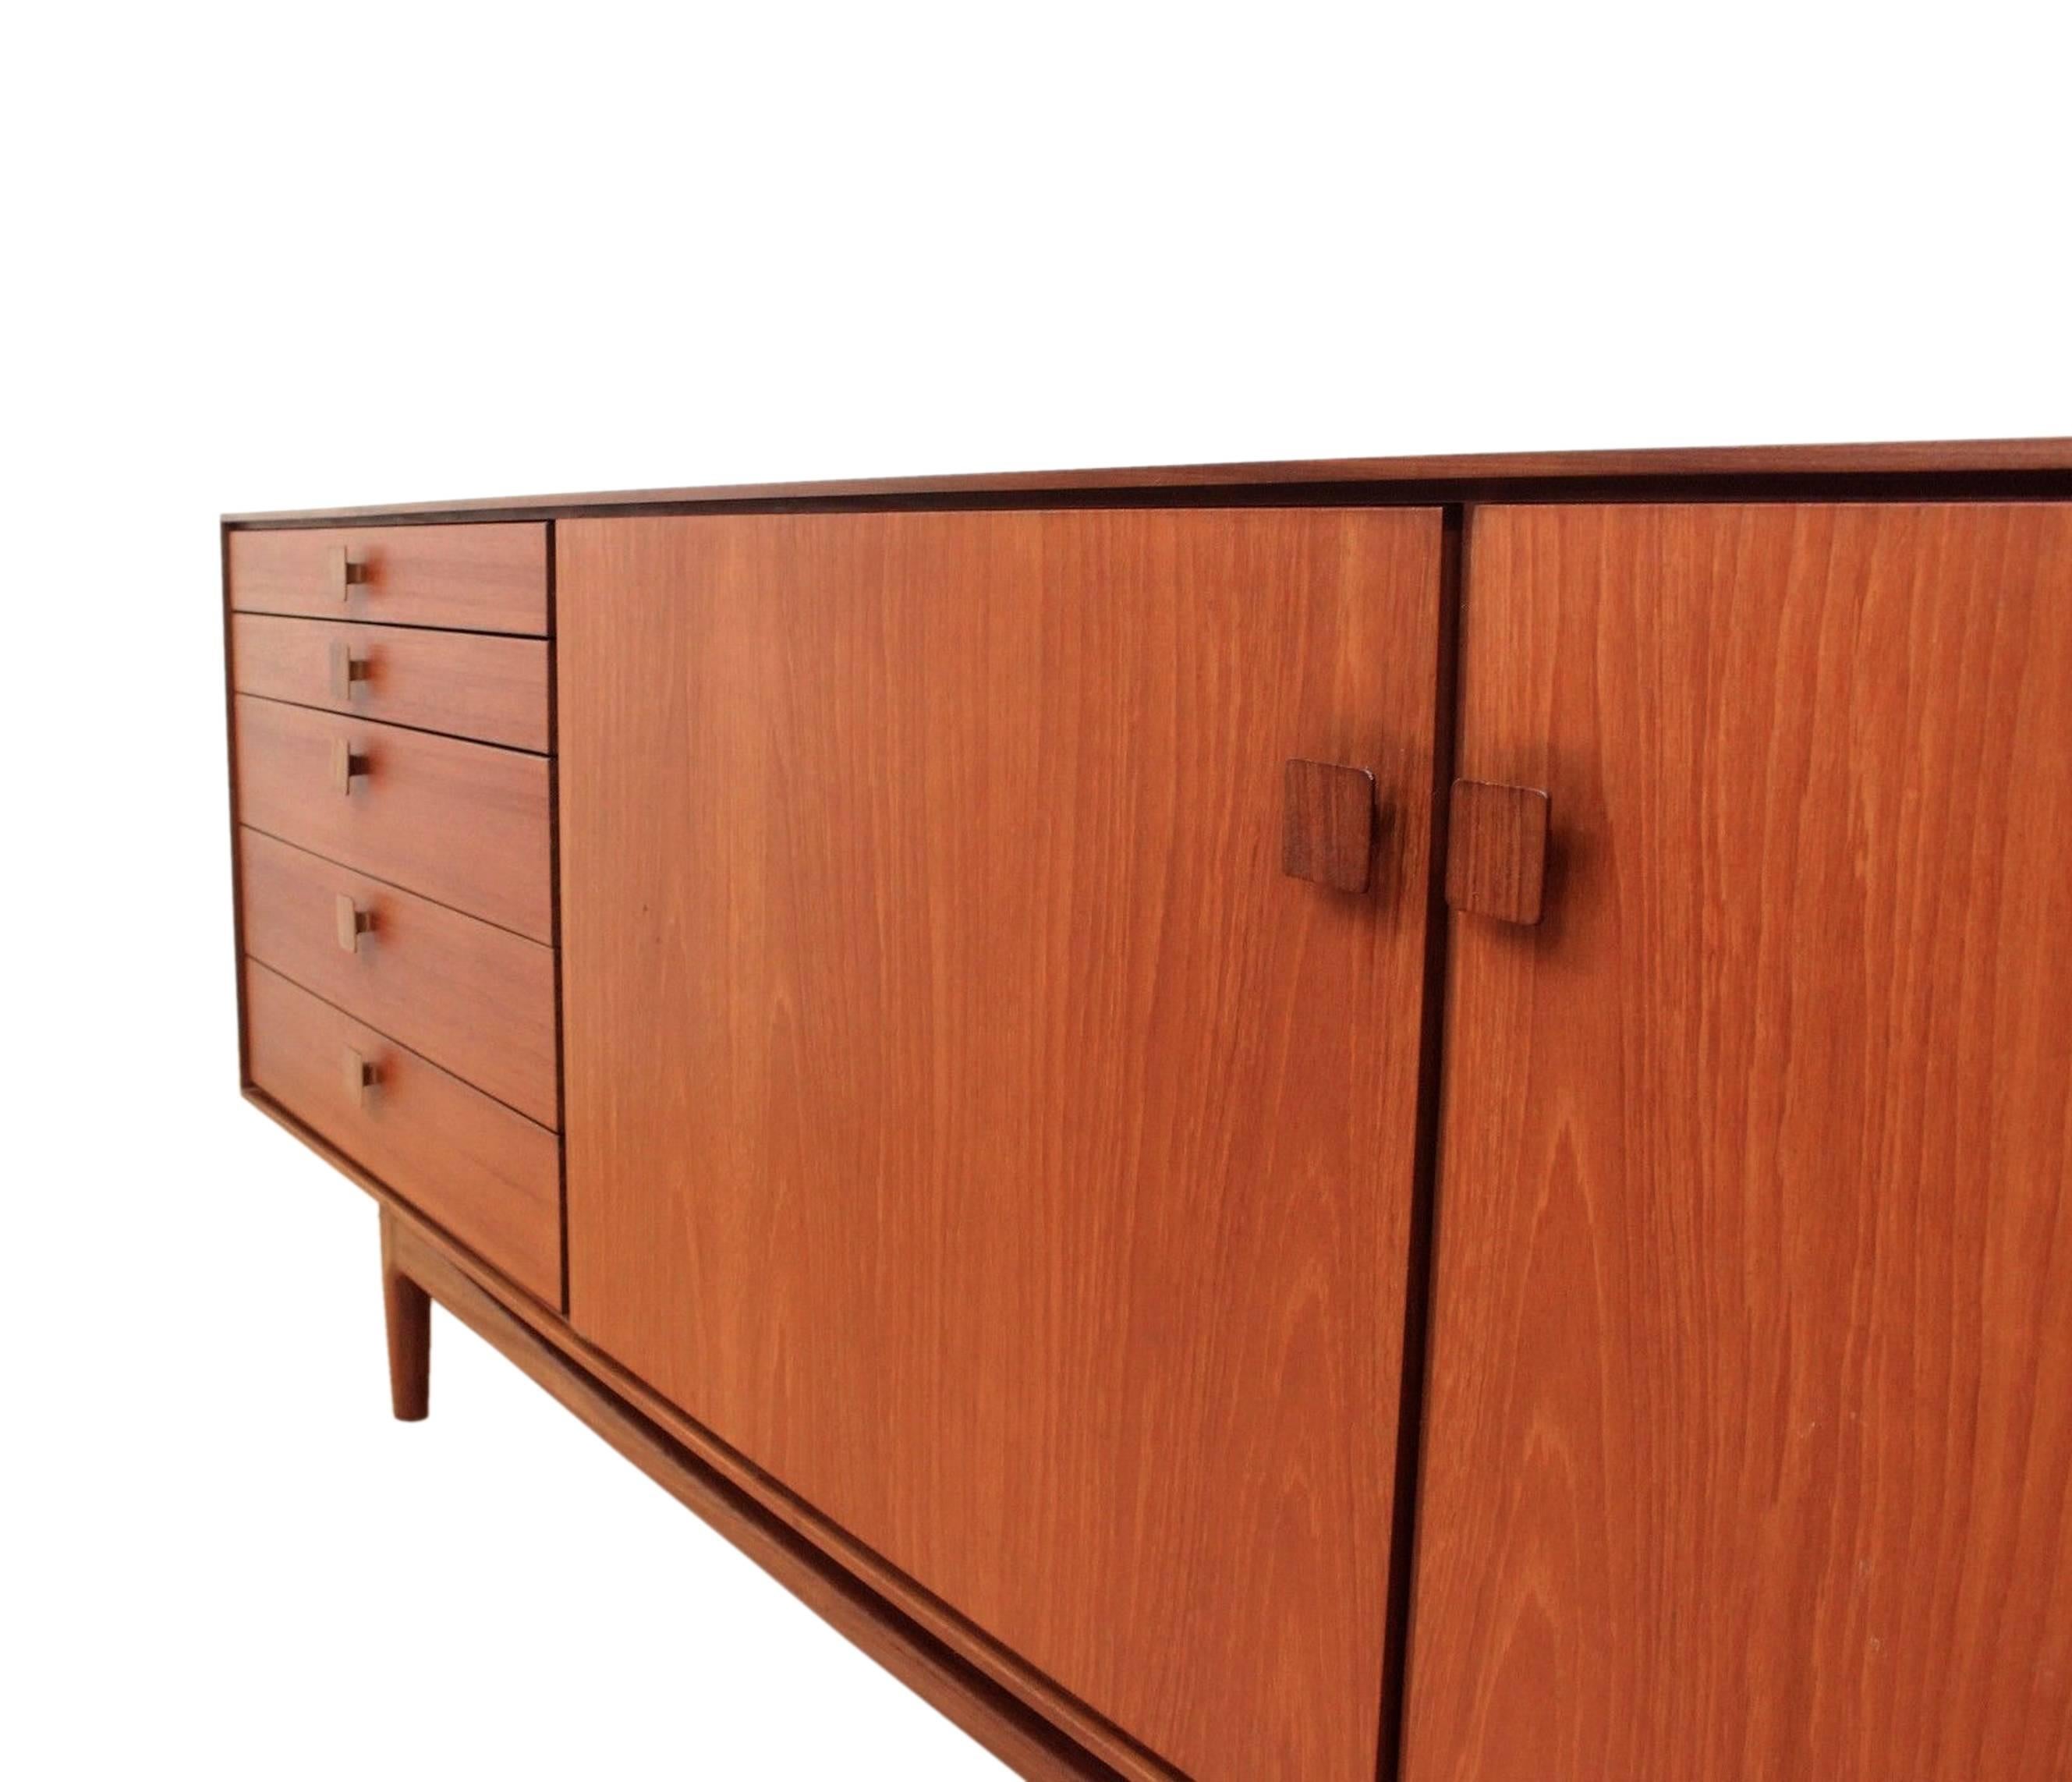 A very Classic Mid-Century piece: This long sideboard offers plenty of storage in the interior cavities with two cupboards each have one adjustable shelf. It is made of teak wood and afromosia handles. Ib Kofod-Larsen has designed it in the 1960s